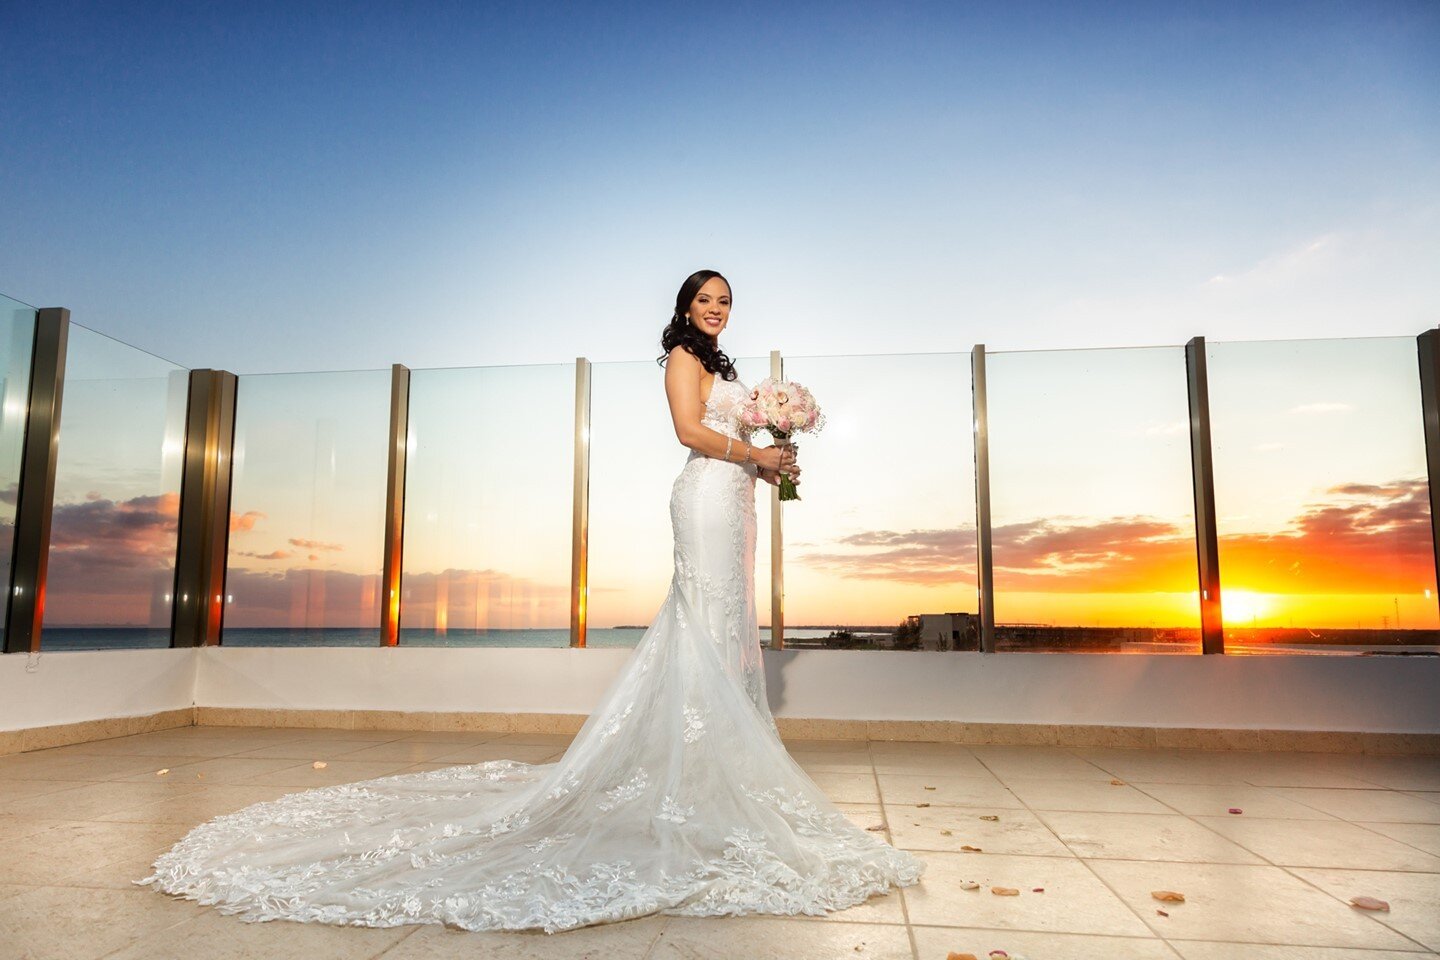 Sunsets on this rooftop are unbeatable! Have to always bring our brides up here for some pictures that won't be forgotten #beachyvows⁠
⁠
Visit BeachyVows.com for the best destination wedding ideas and venues! Beachy Vows only takes on a limited numbe